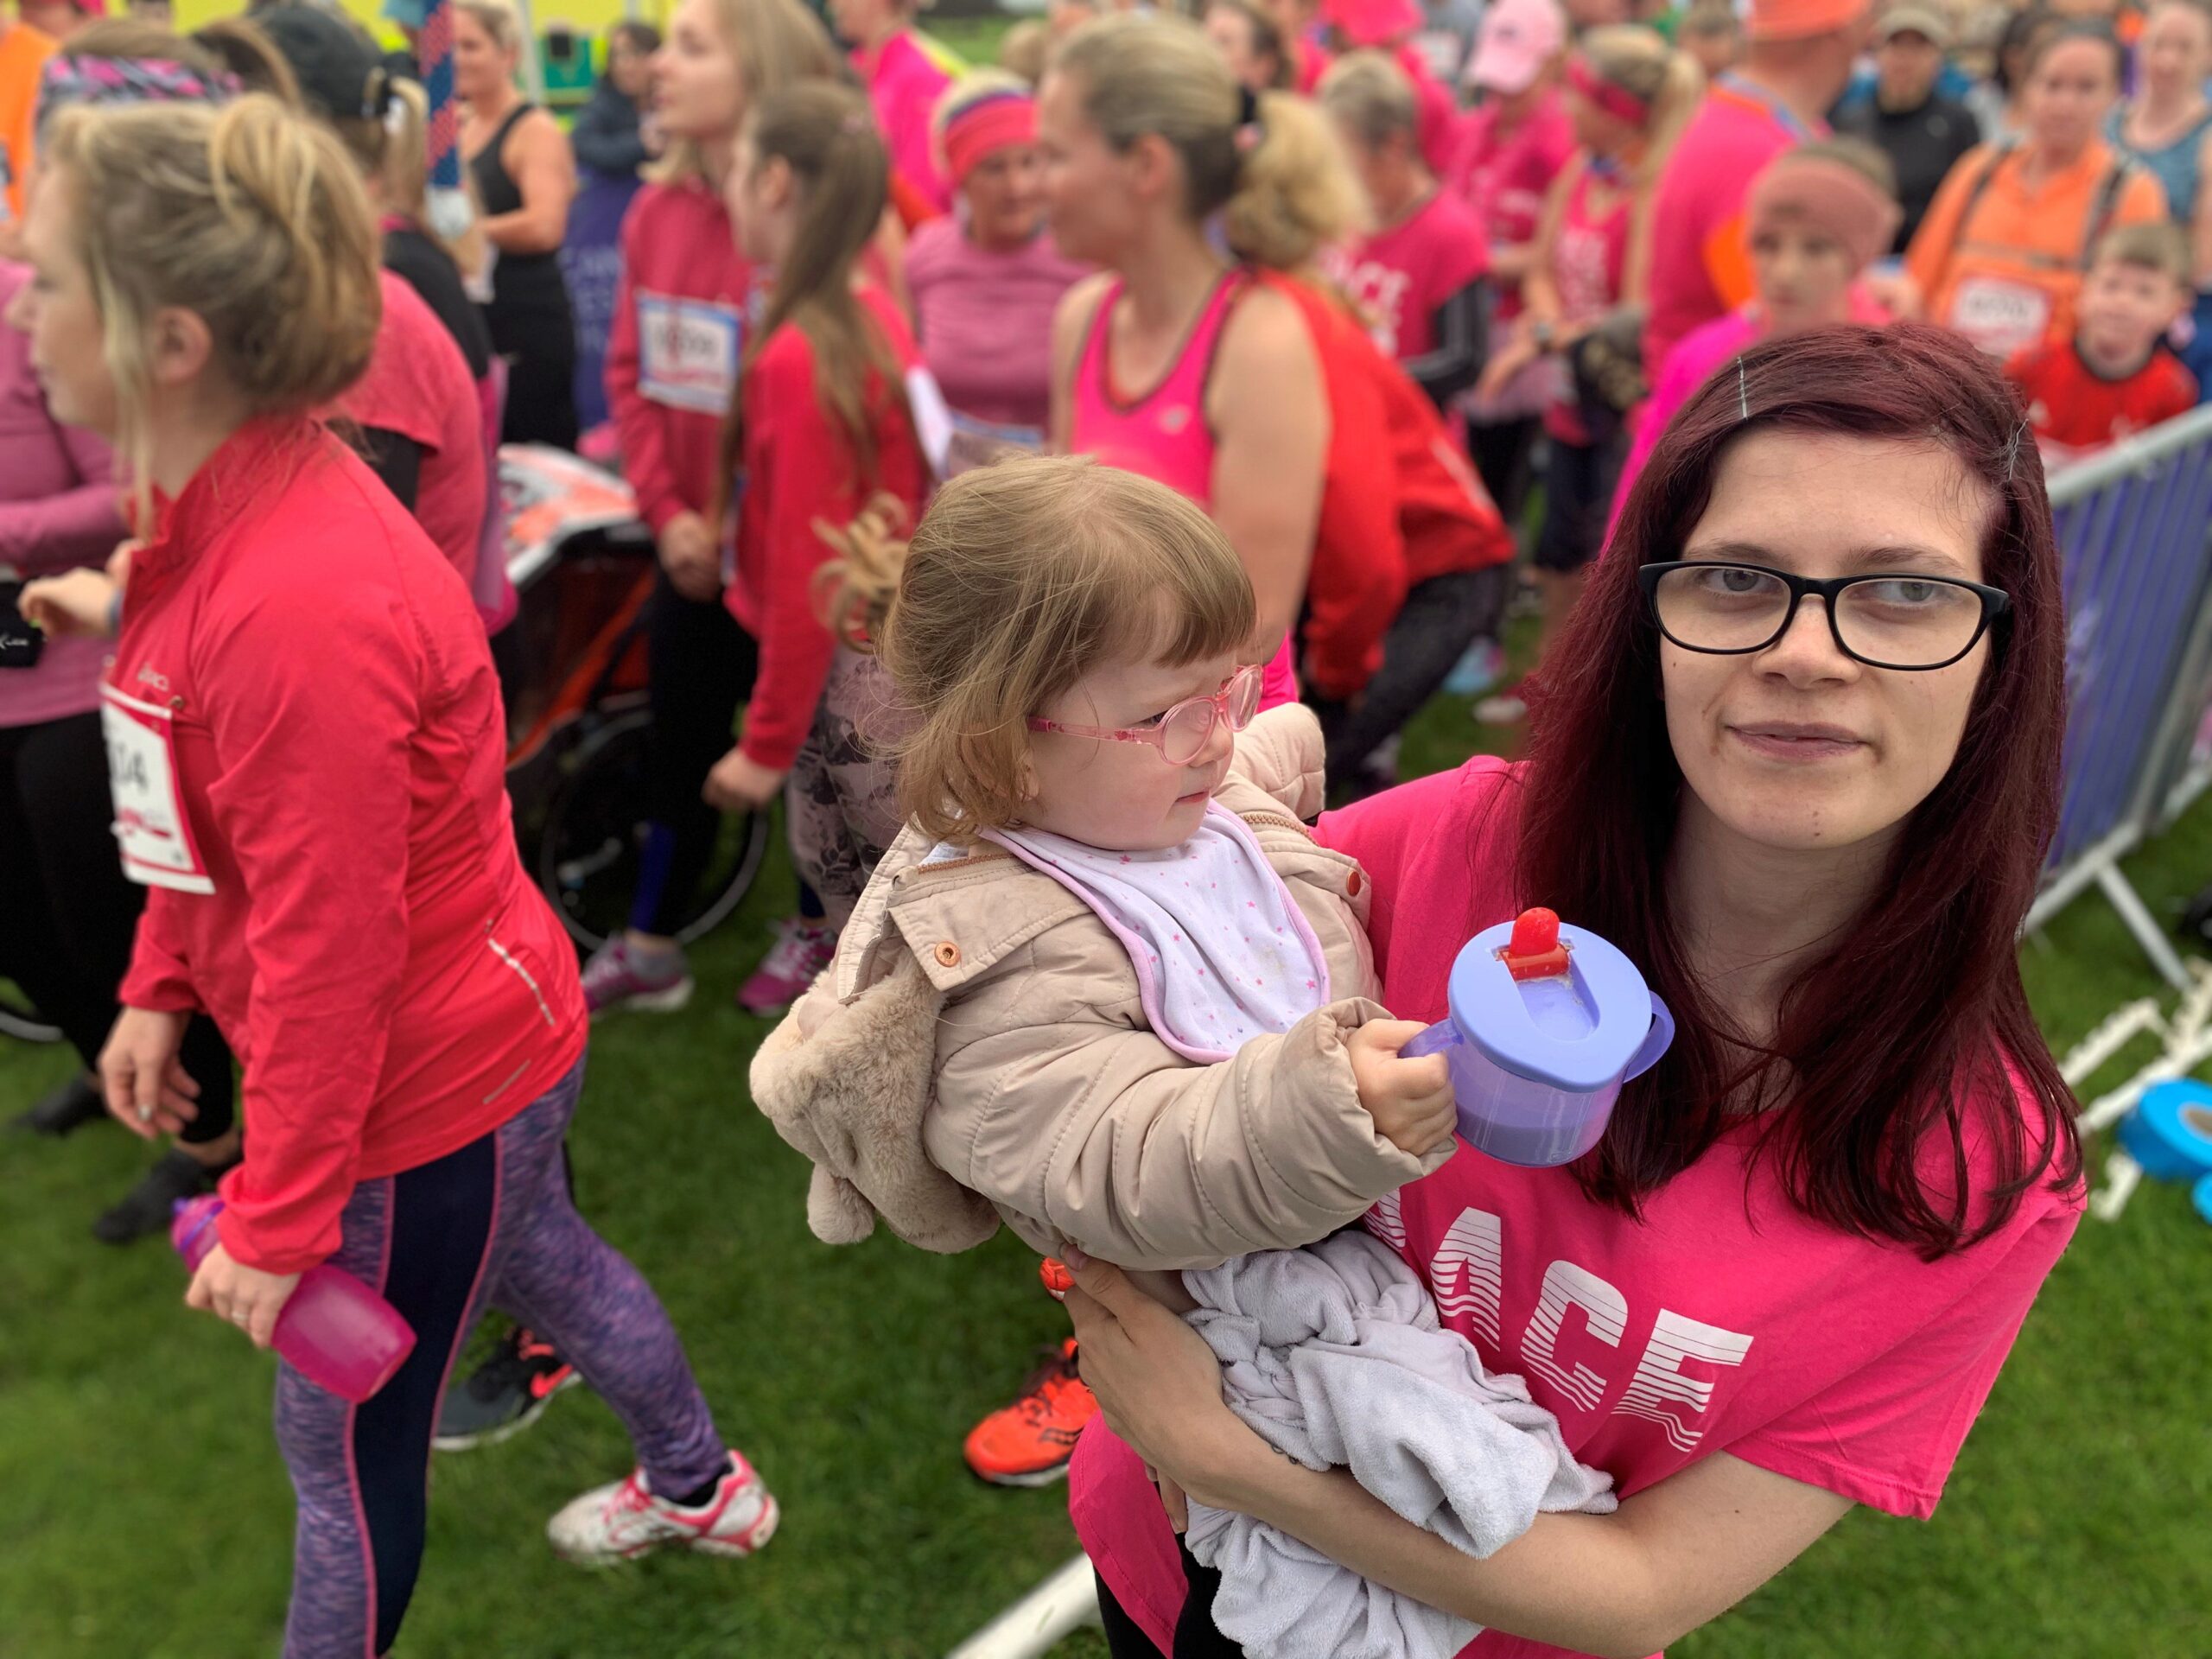 Race for Life VIP starter Shannon Murphy at the start line of Inverness with daughter Sophia scaled